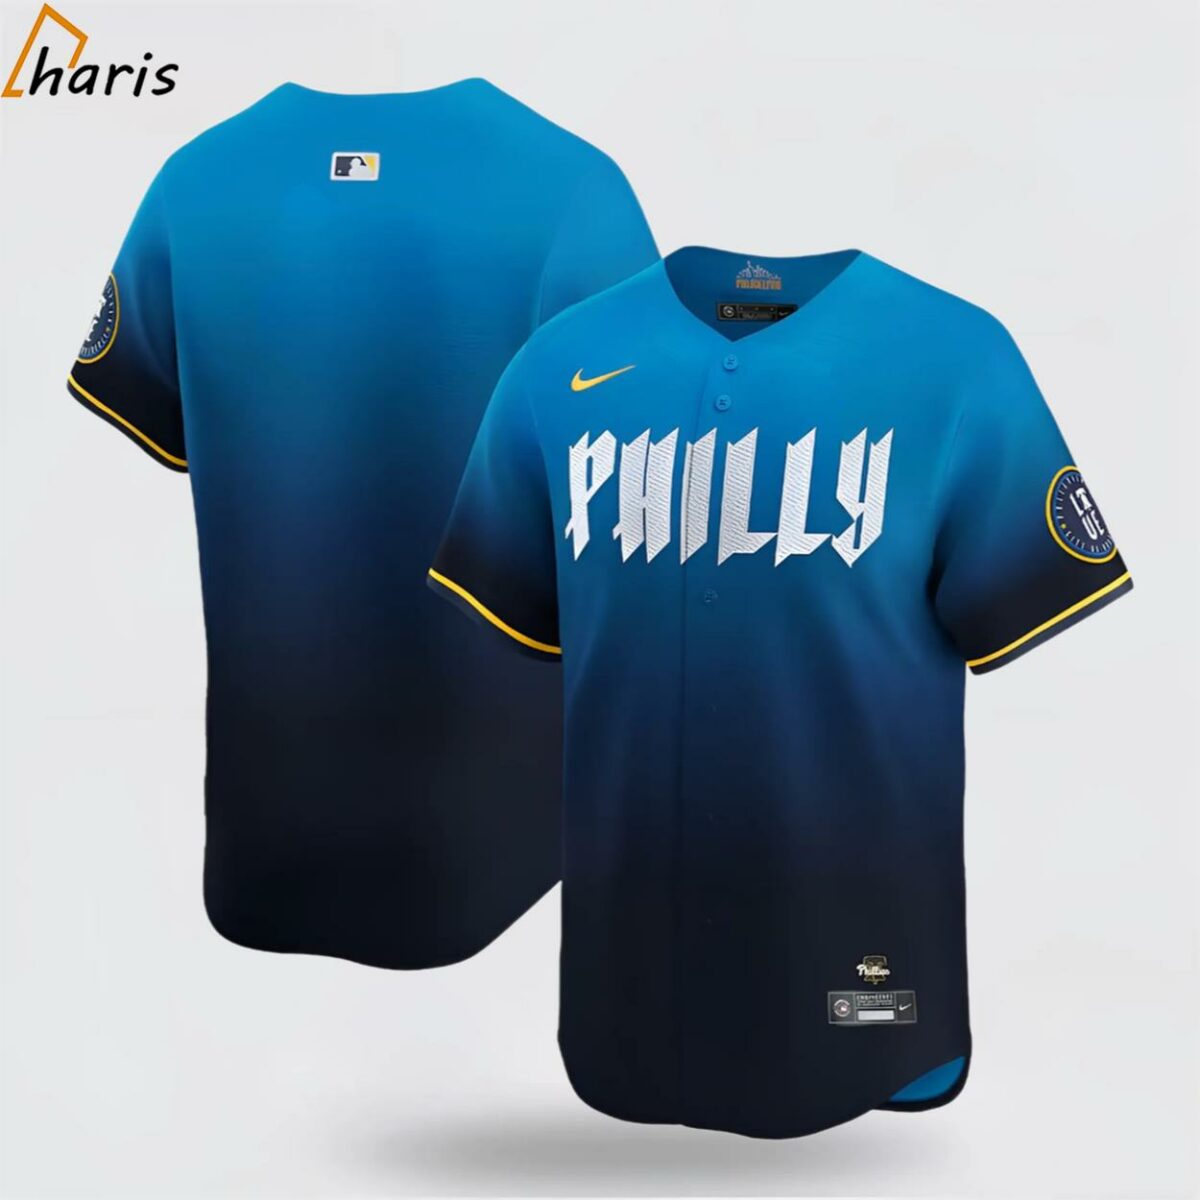 Nike MLB Limited City Connect Philadelphia Phillies Jersey 1 jersey